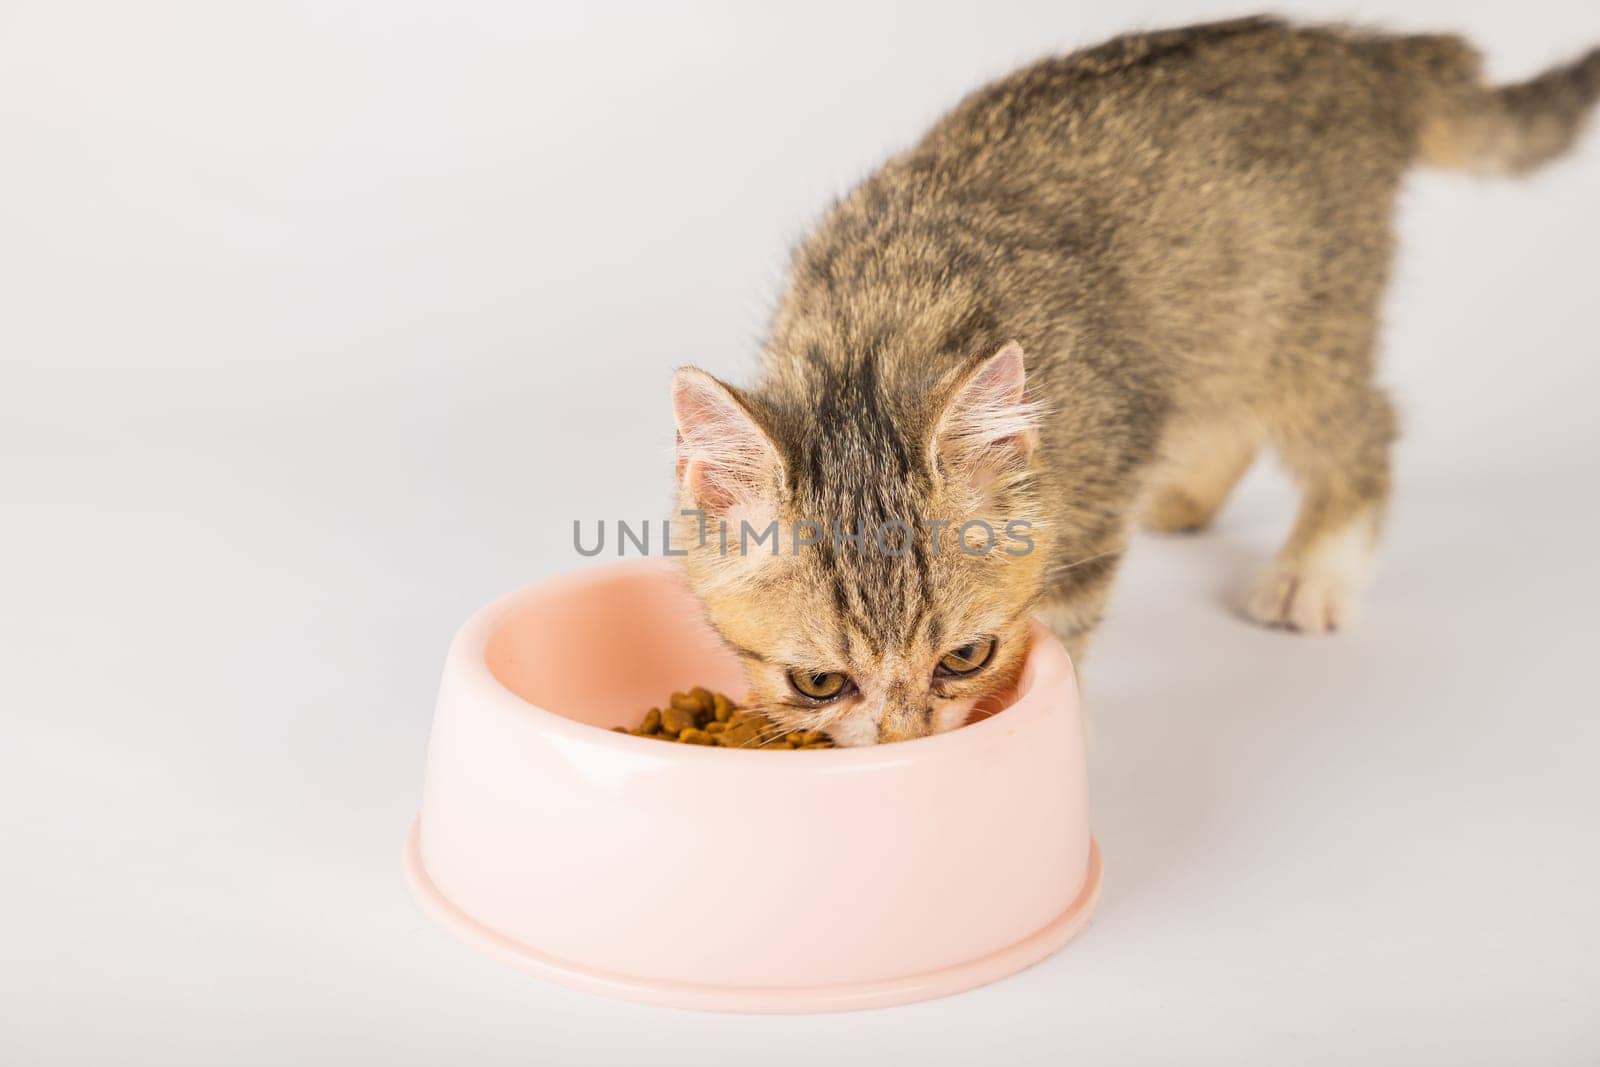 In an isolated setting a cute tabby kitten is sitting next to a food bowl eating its meal on the kitchen floor. The cat's fluffy tail and small tongue add to the endearing portrait. by Sorapop